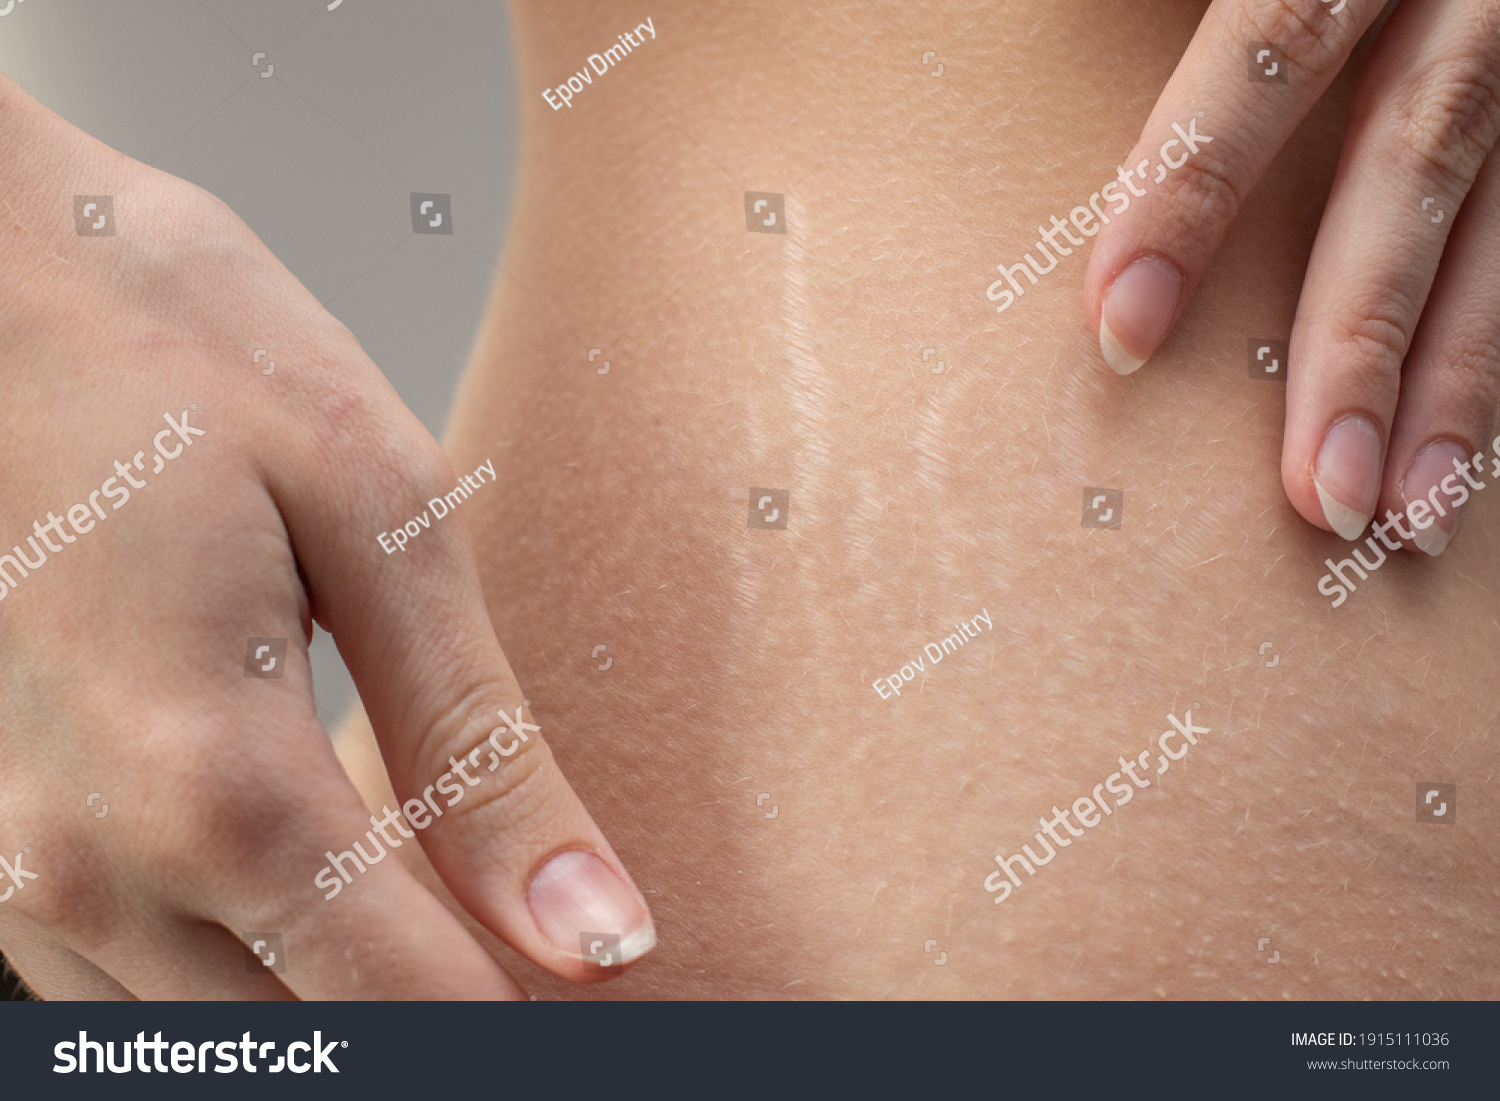 Woman hips with visible stretch marks. Young woman showing Stretch mark scars on her body. #1915111036